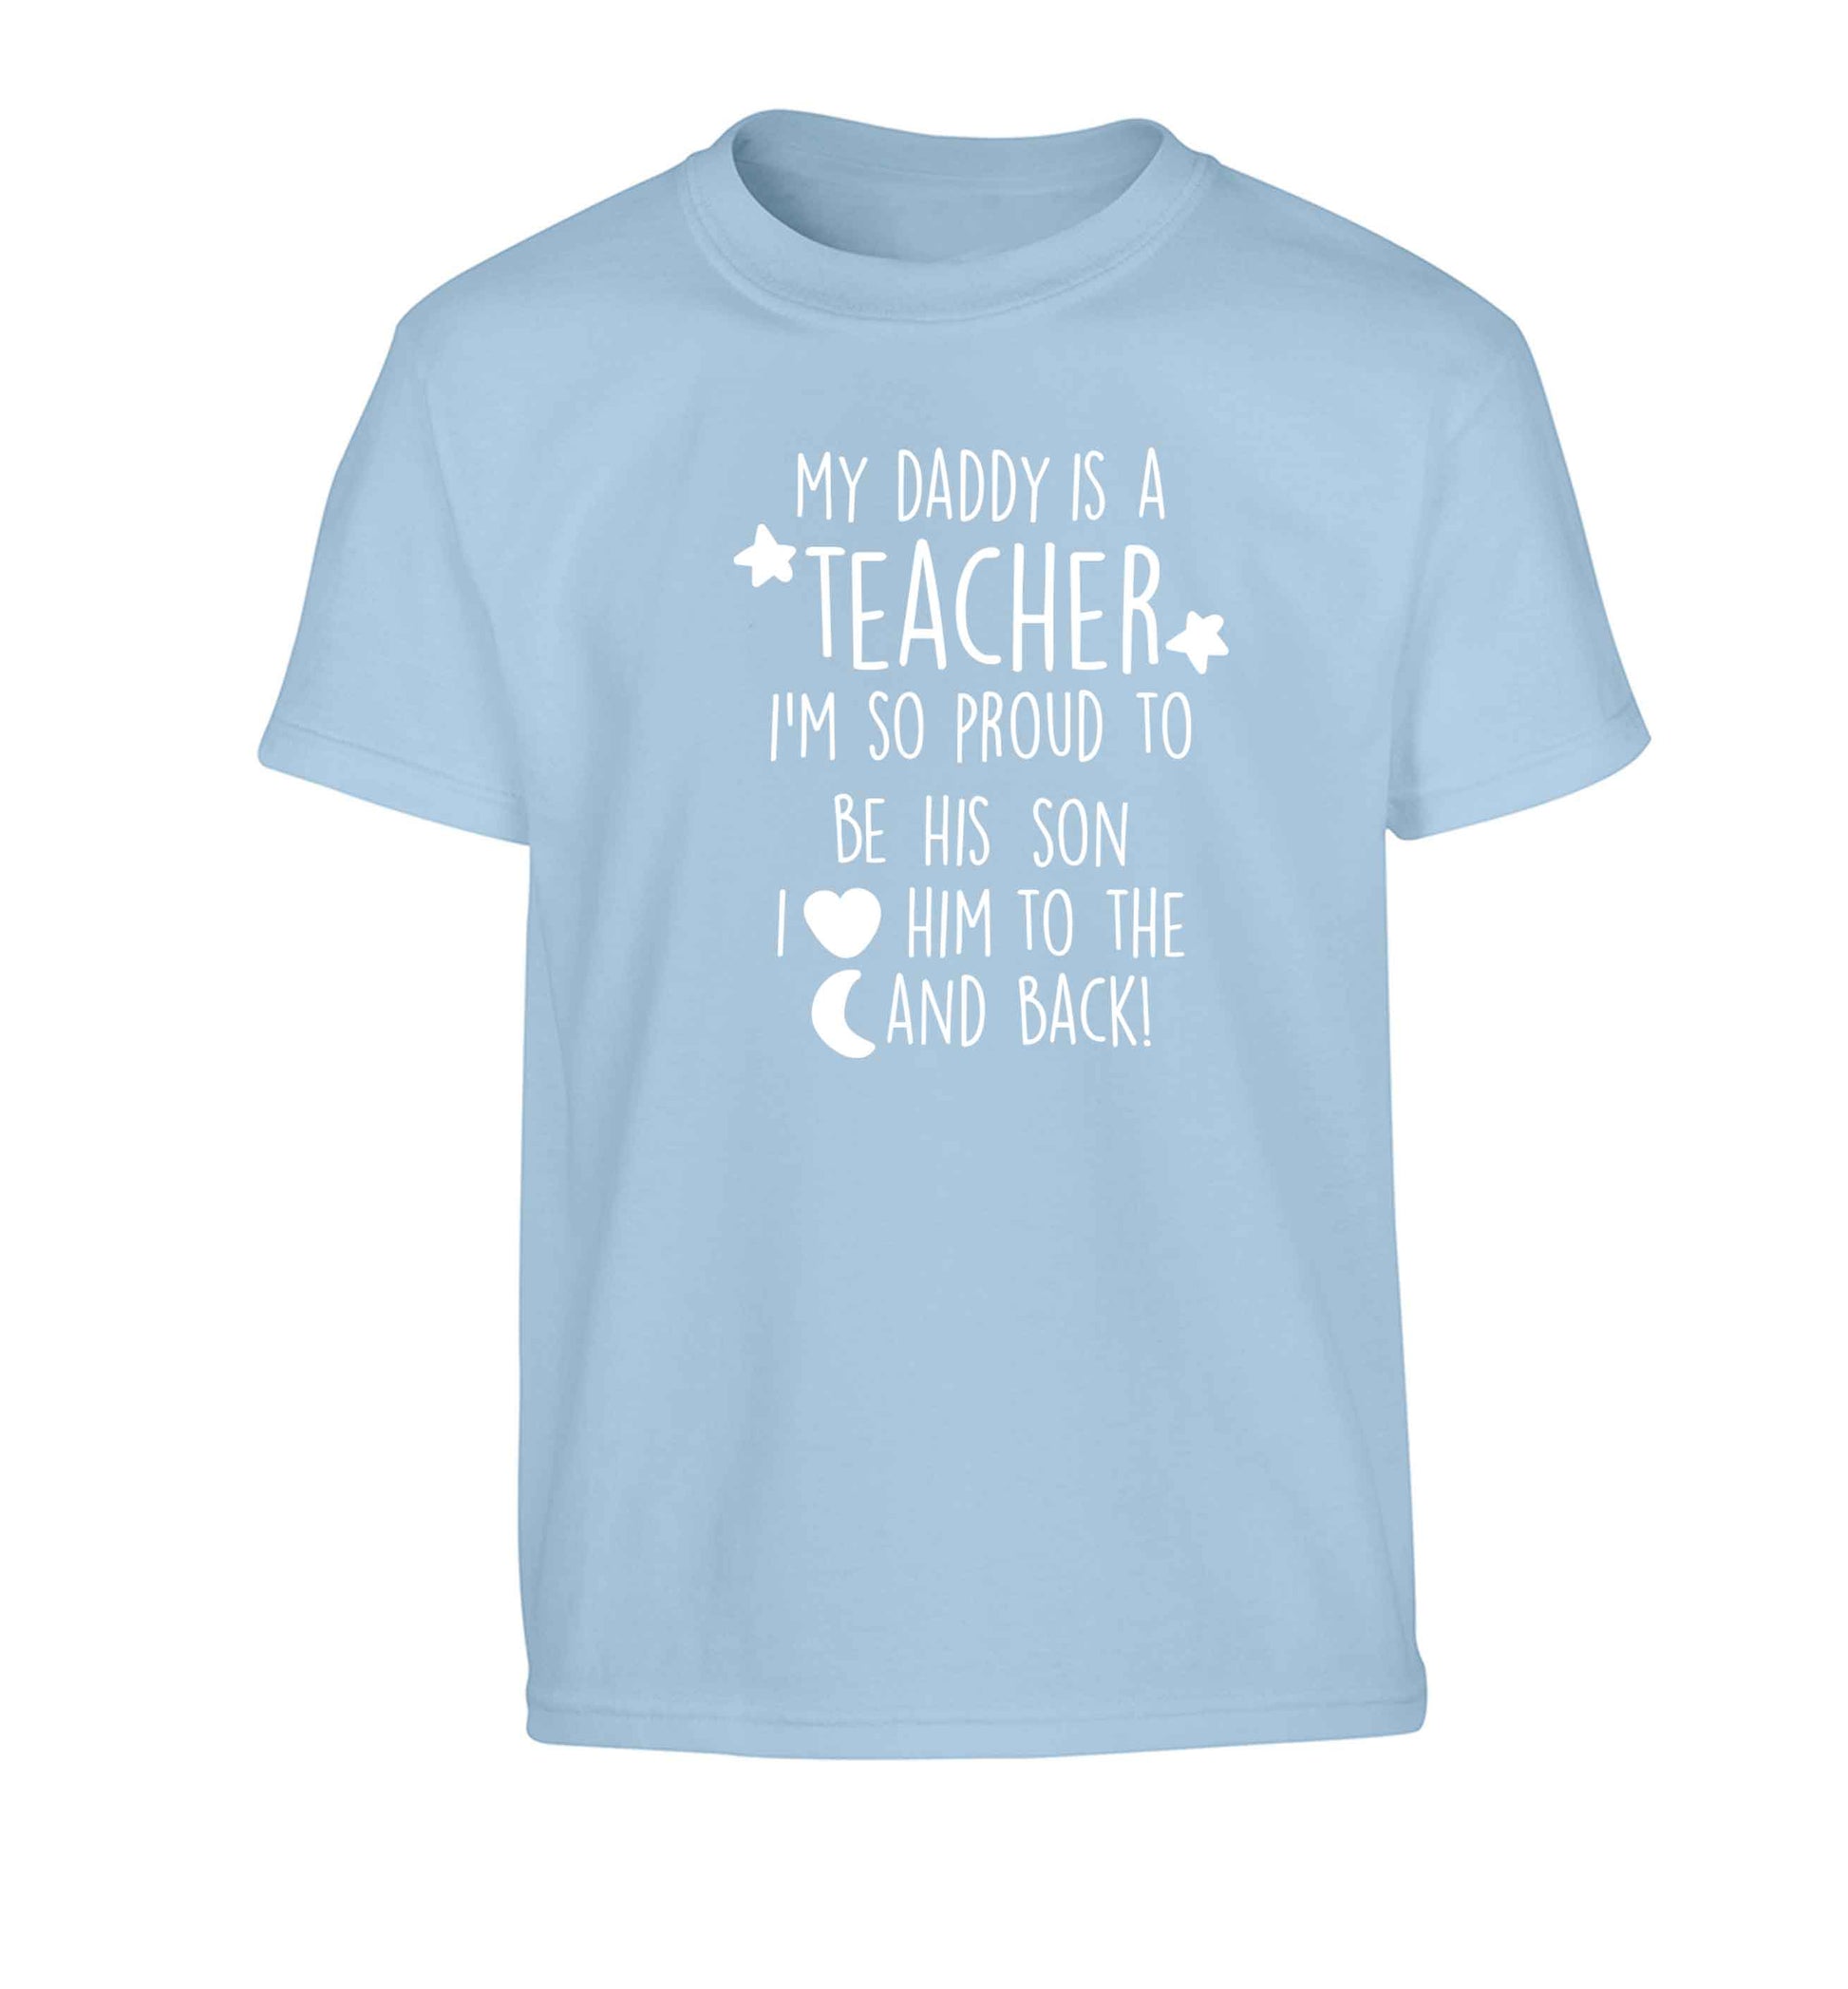 My daddy is a teacher I'm so proud to be his son I love her to the moon and back Children's light blue Tshirt 12-13 Years